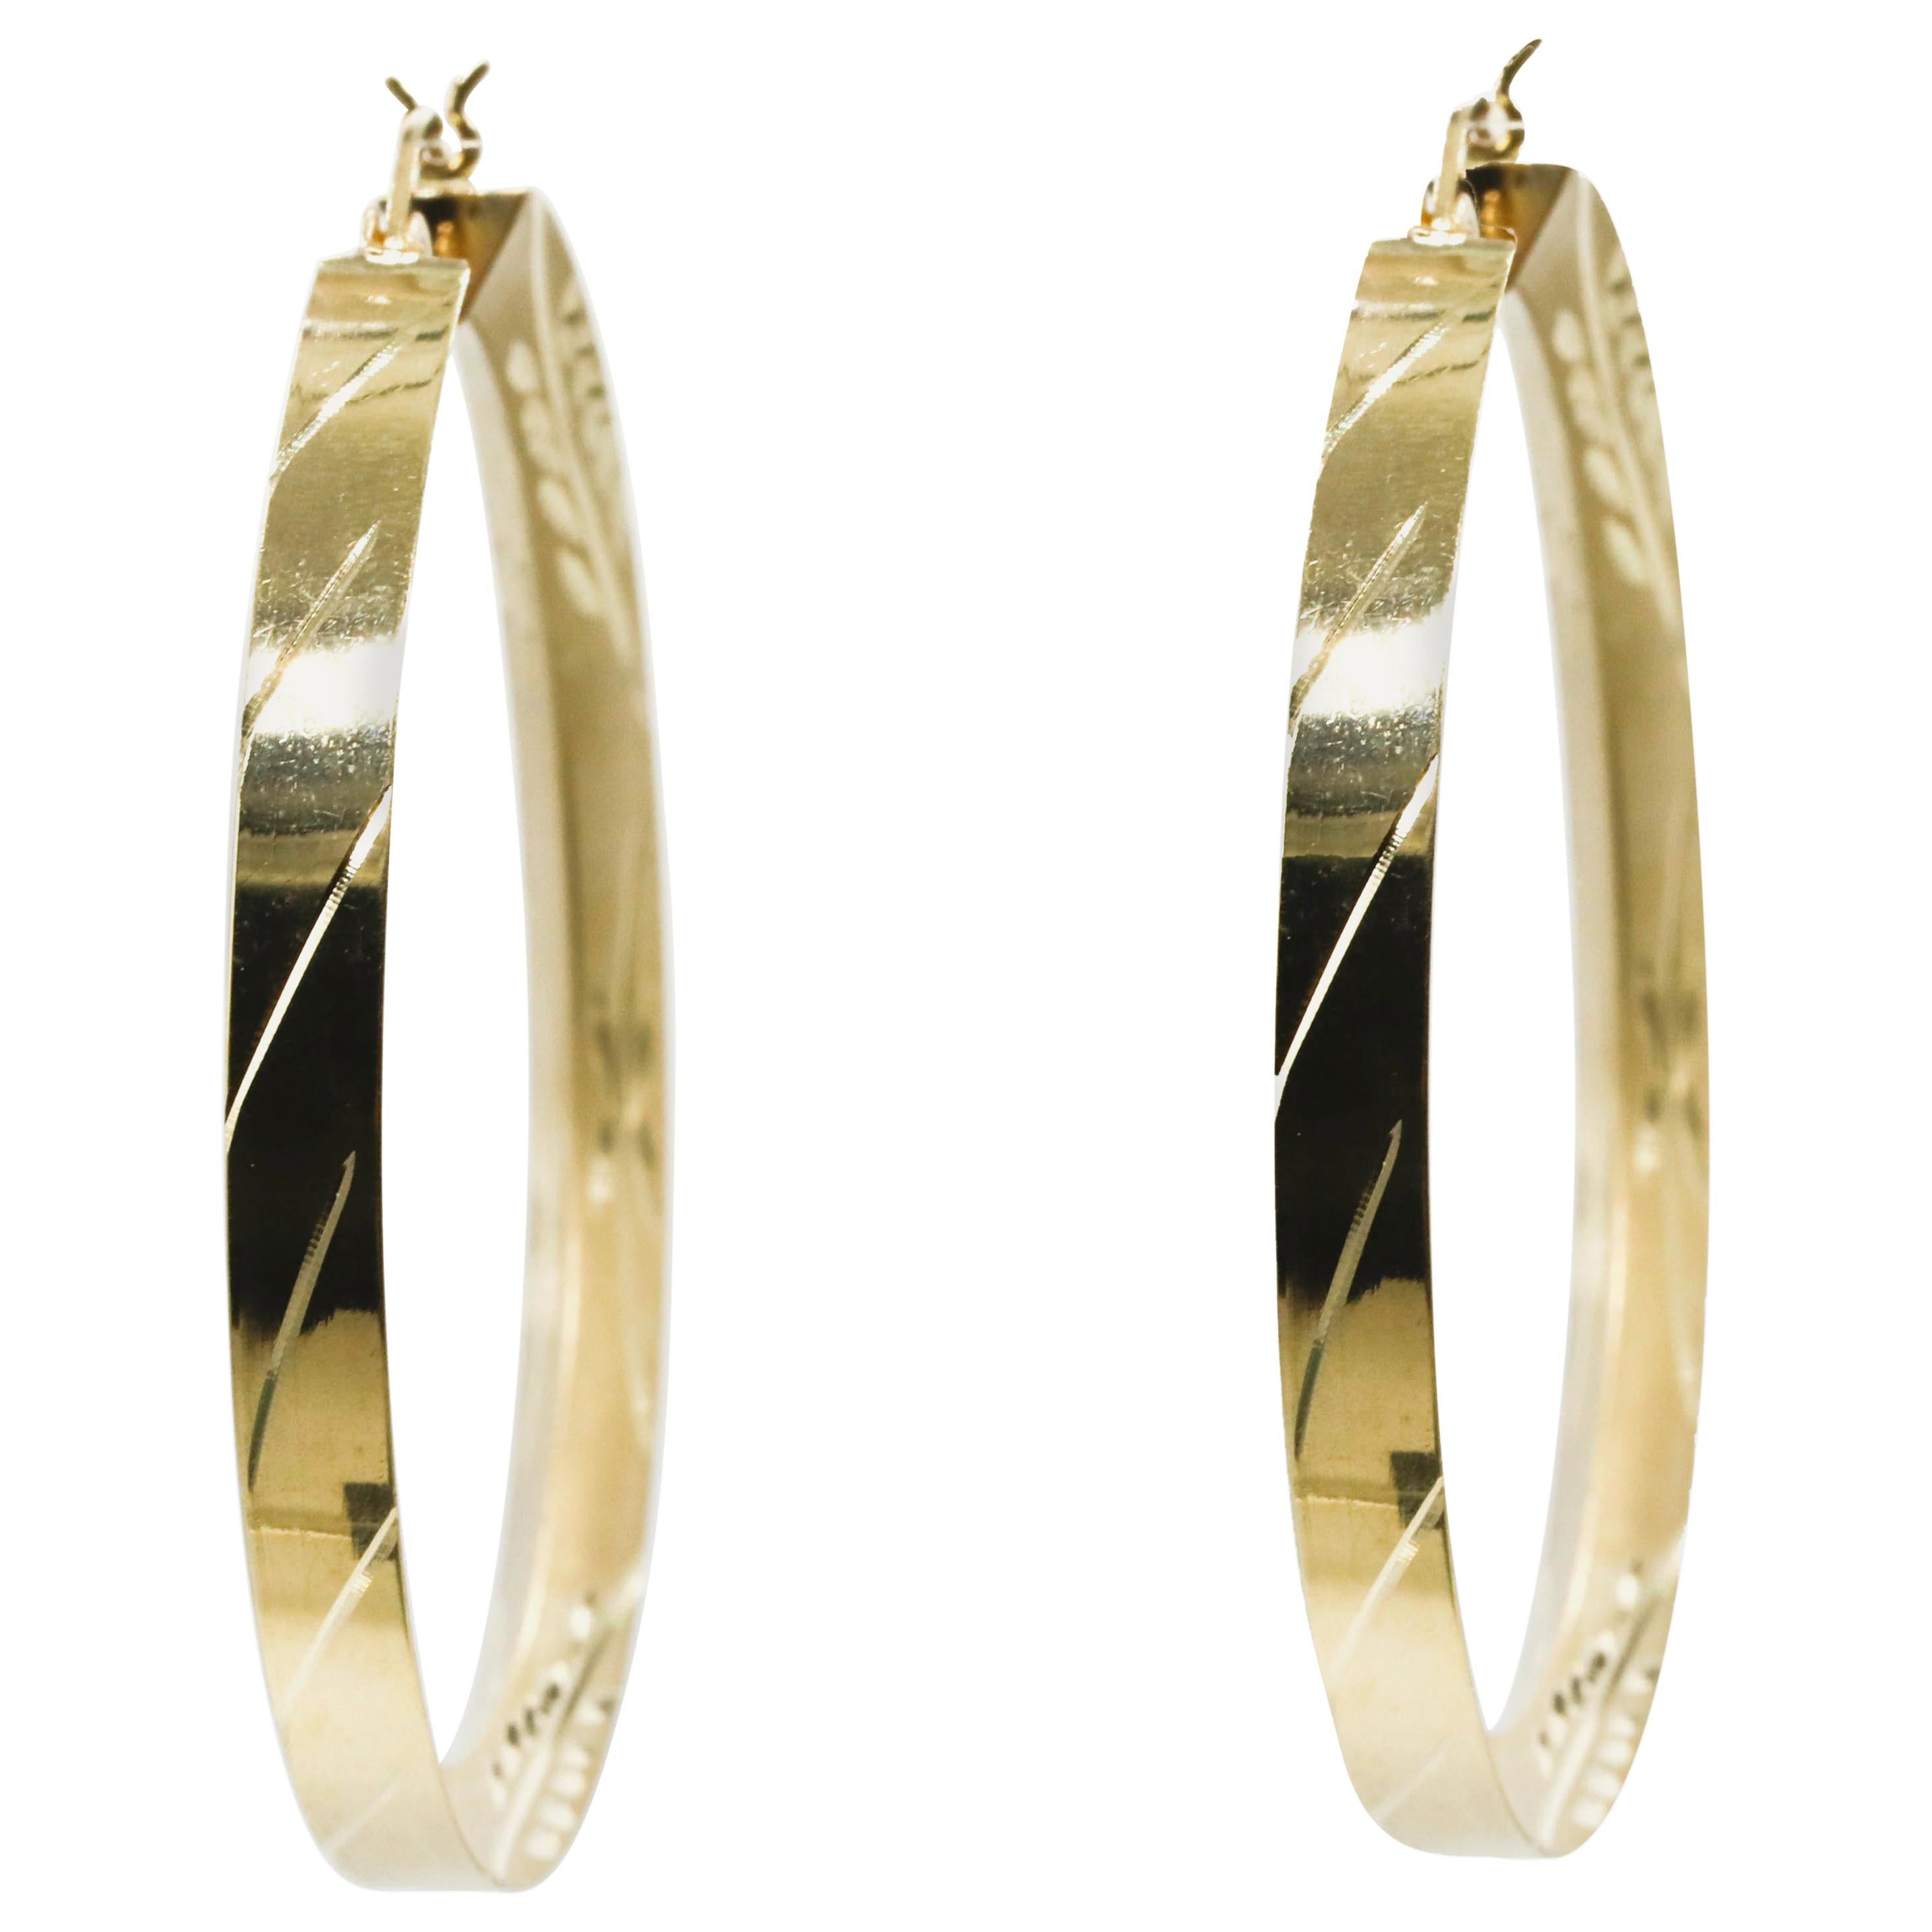 14 Karat Yellow Gold Hoop Earrings with Etched Design